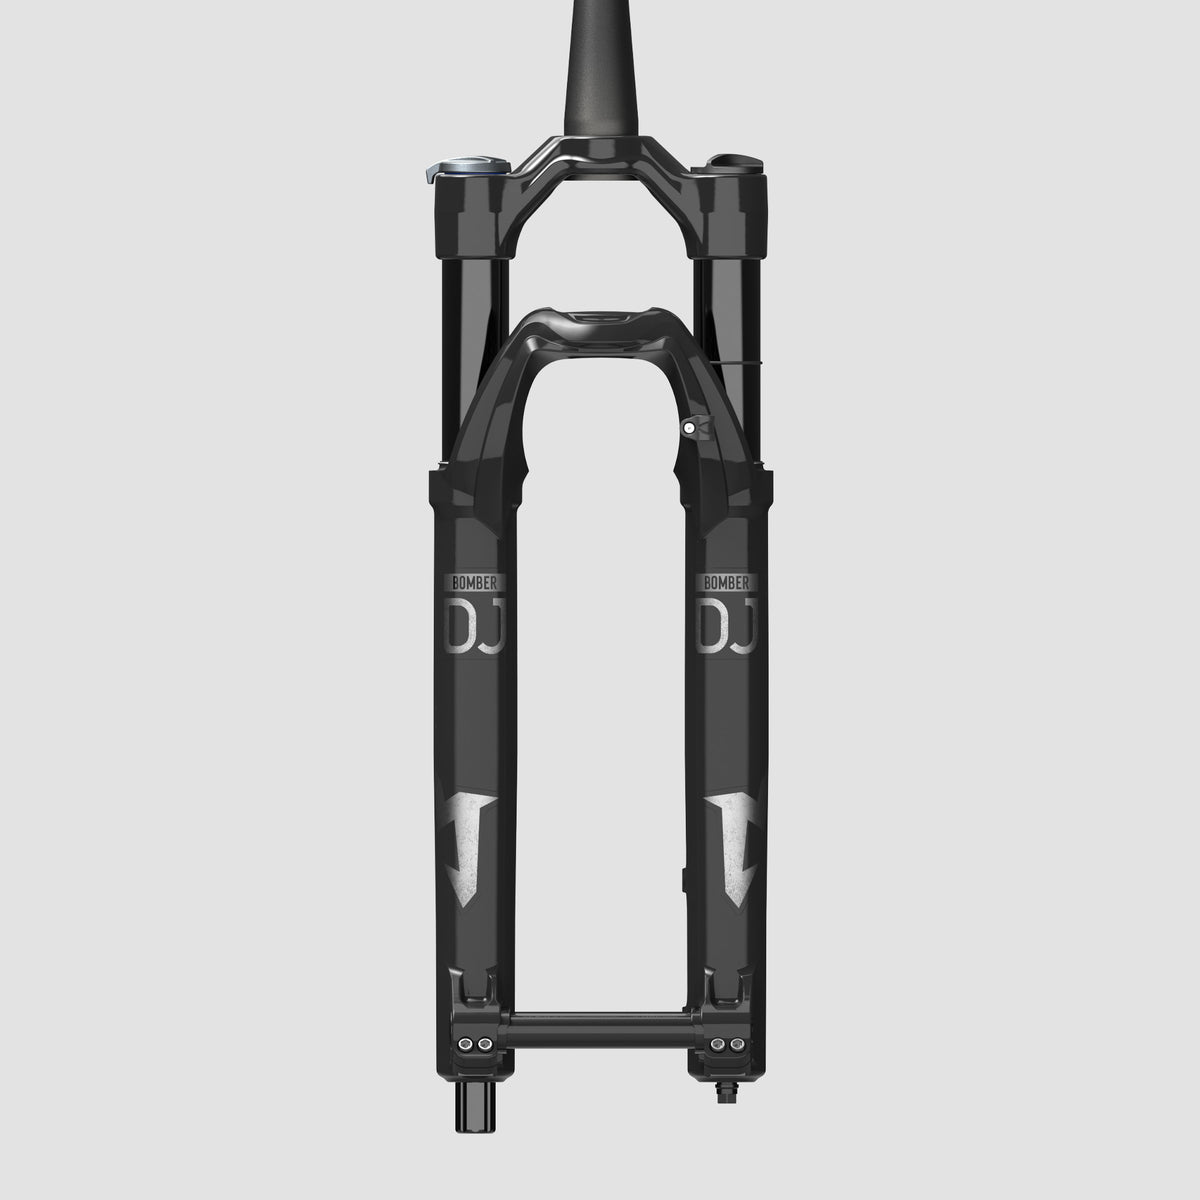 Marzocchi Bomber DJ: Mountain Bike Suspension Fork for Dirt Jumping